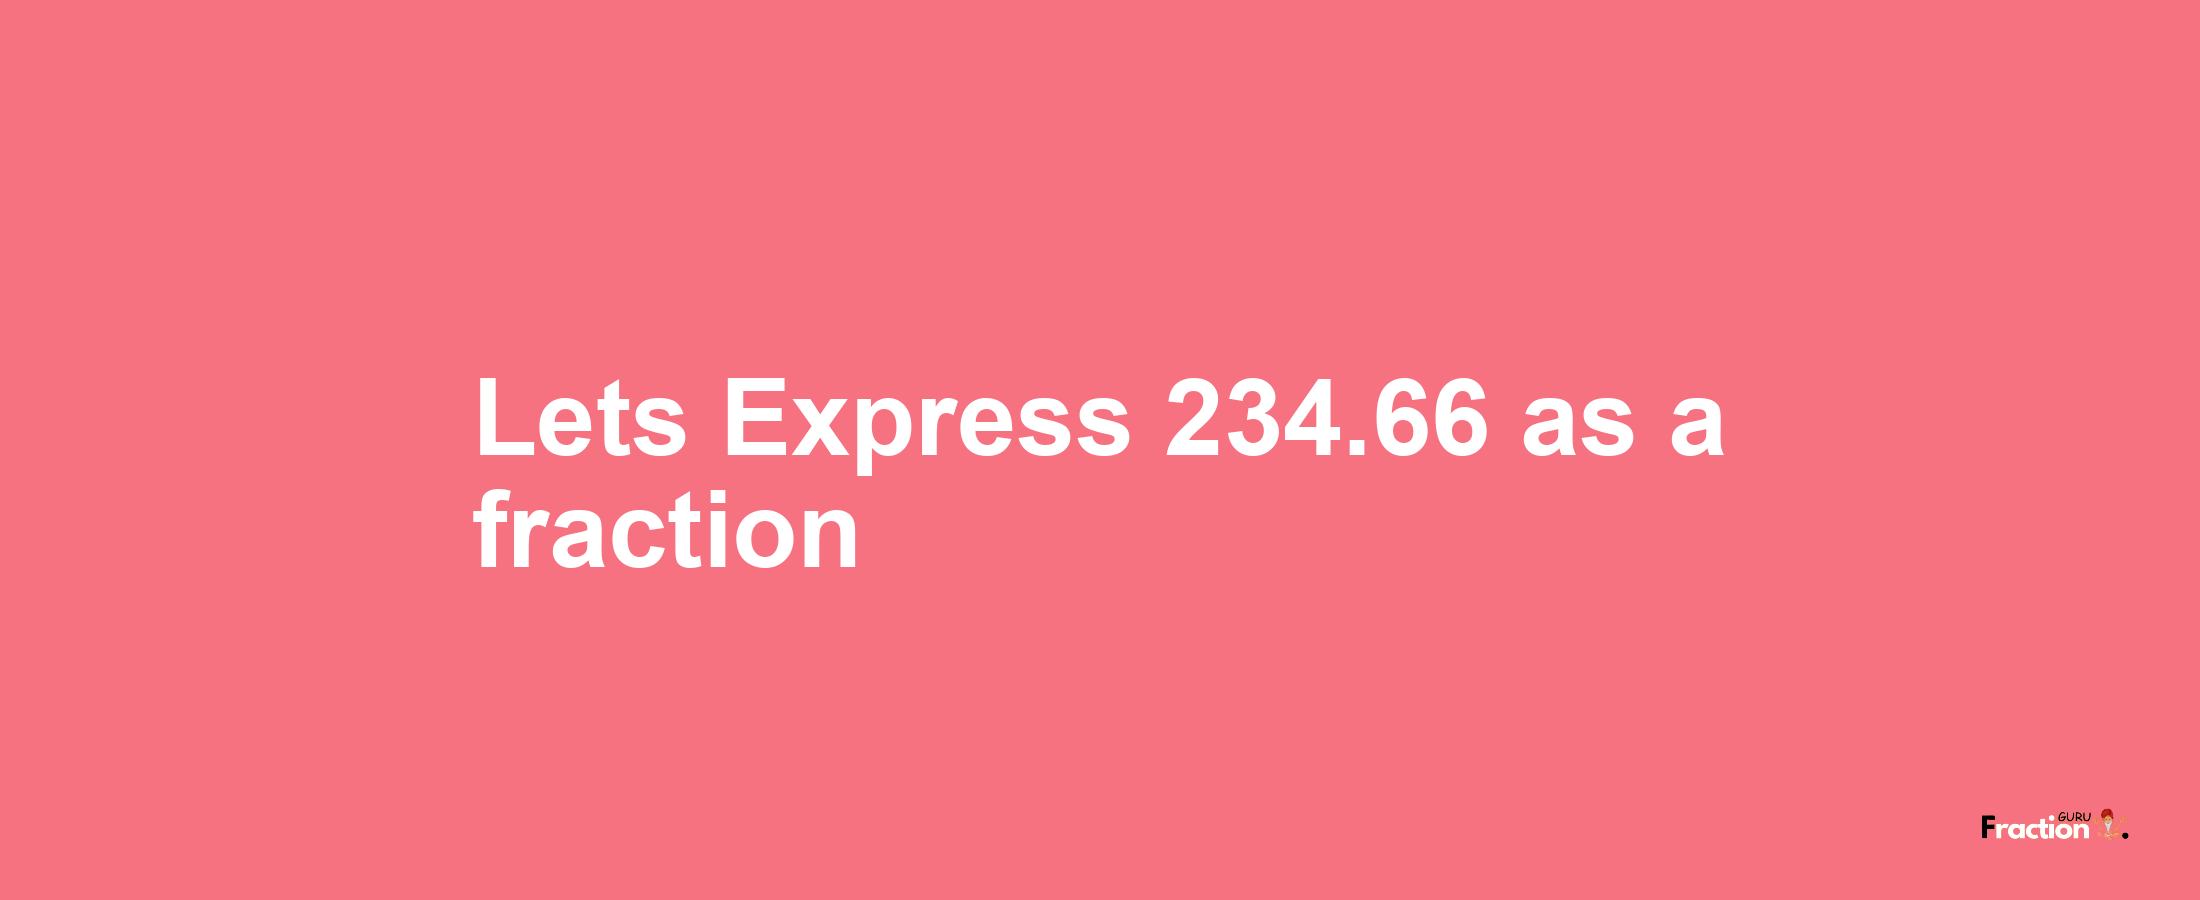 Lets Express 234.66 as afraction